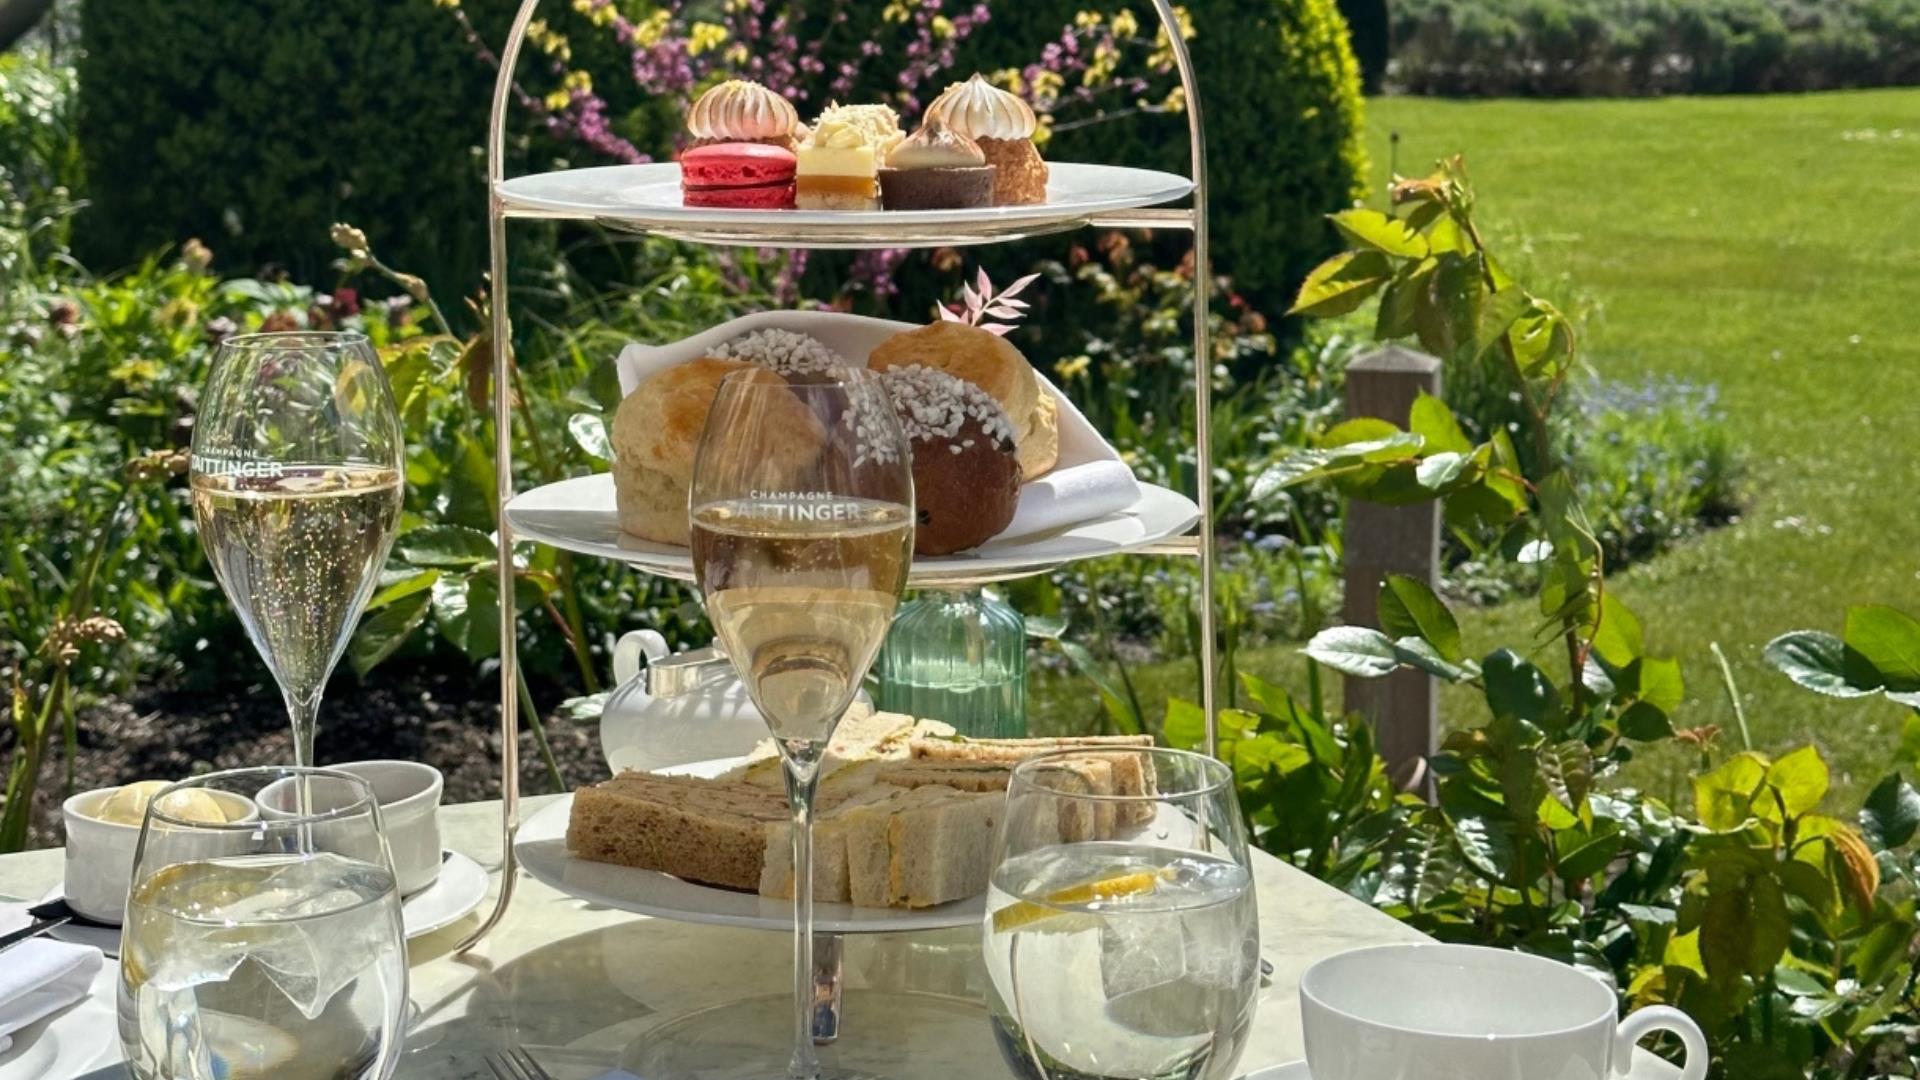 Afternoon Tea at The Royal Crescent Hotel & Spa